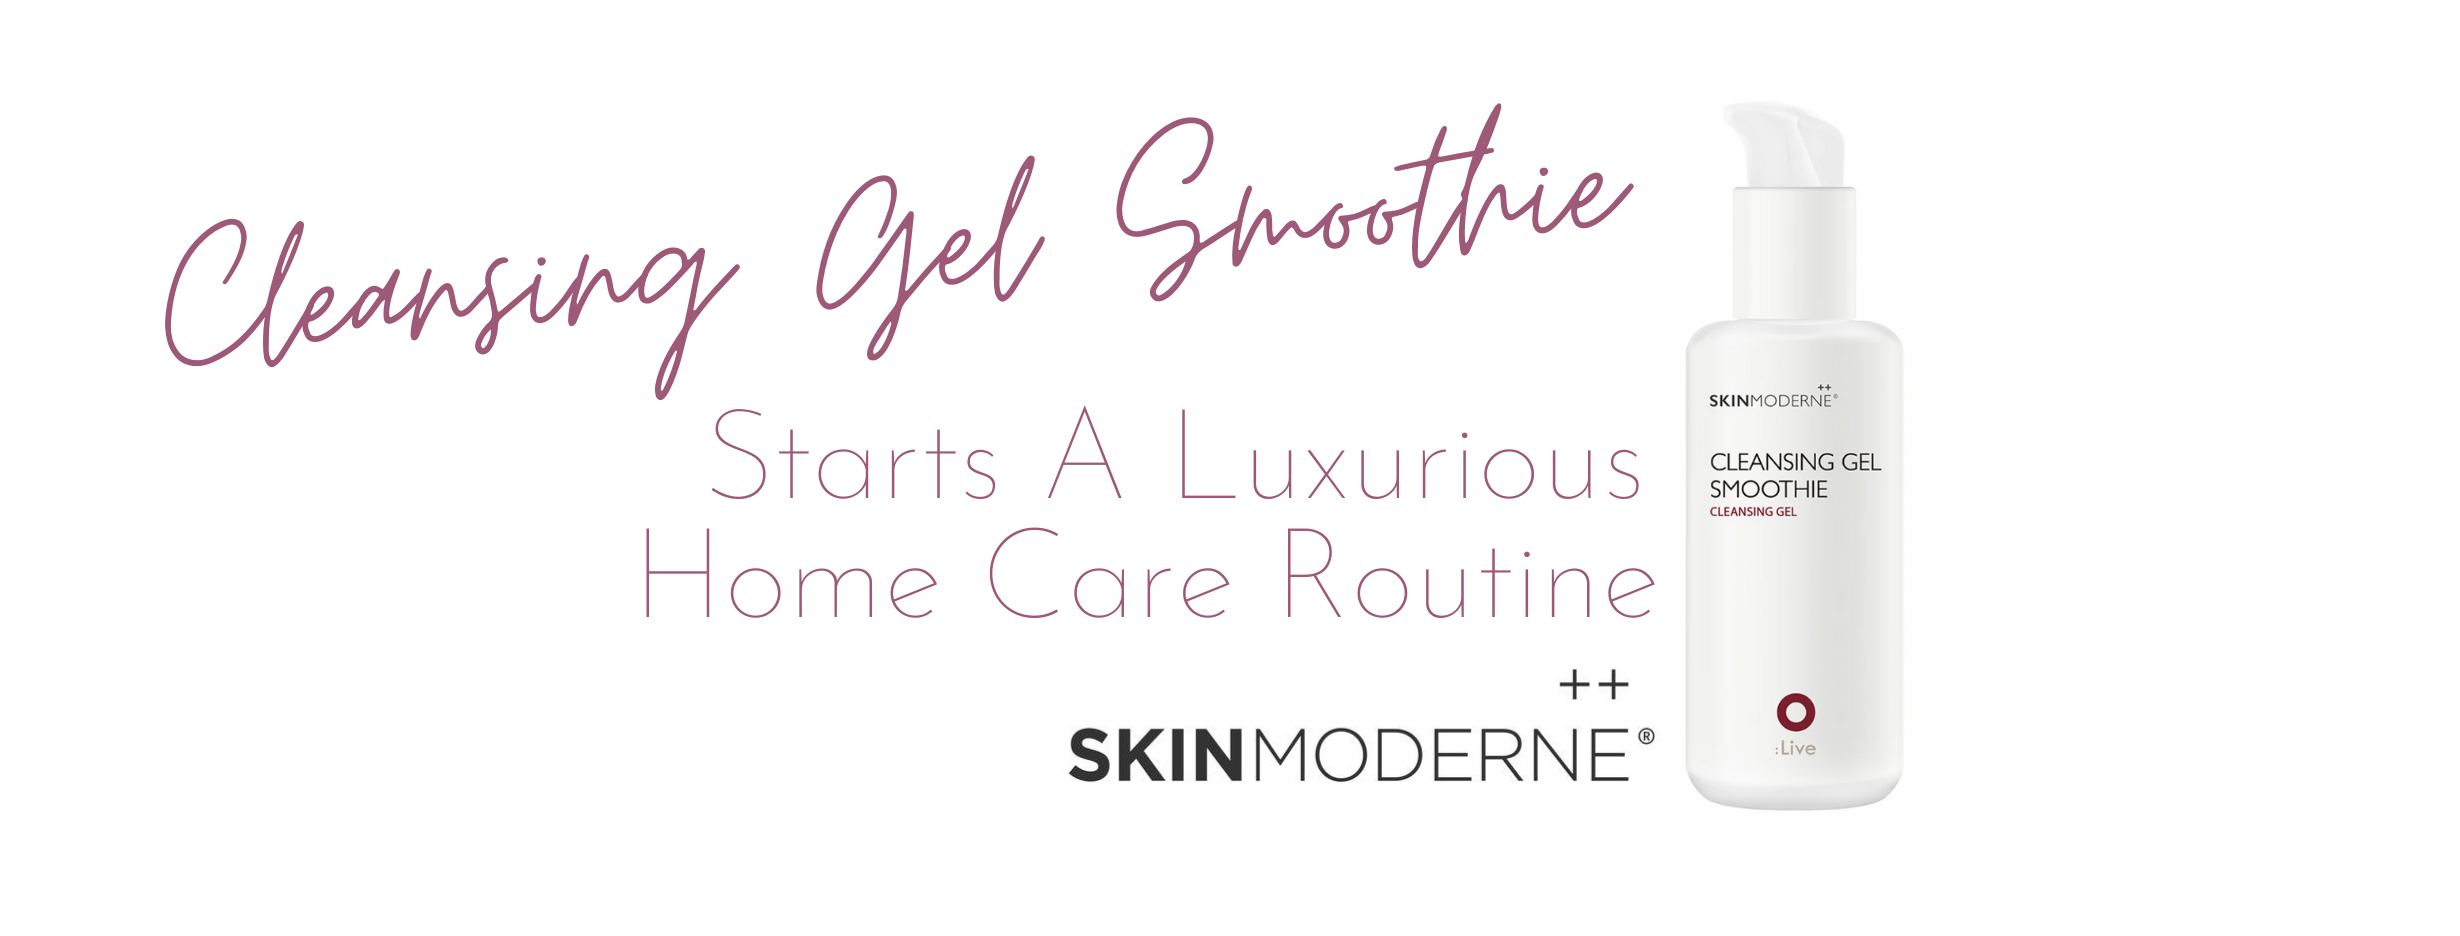 My Luxurious Home Care Routine From Skin Moderne